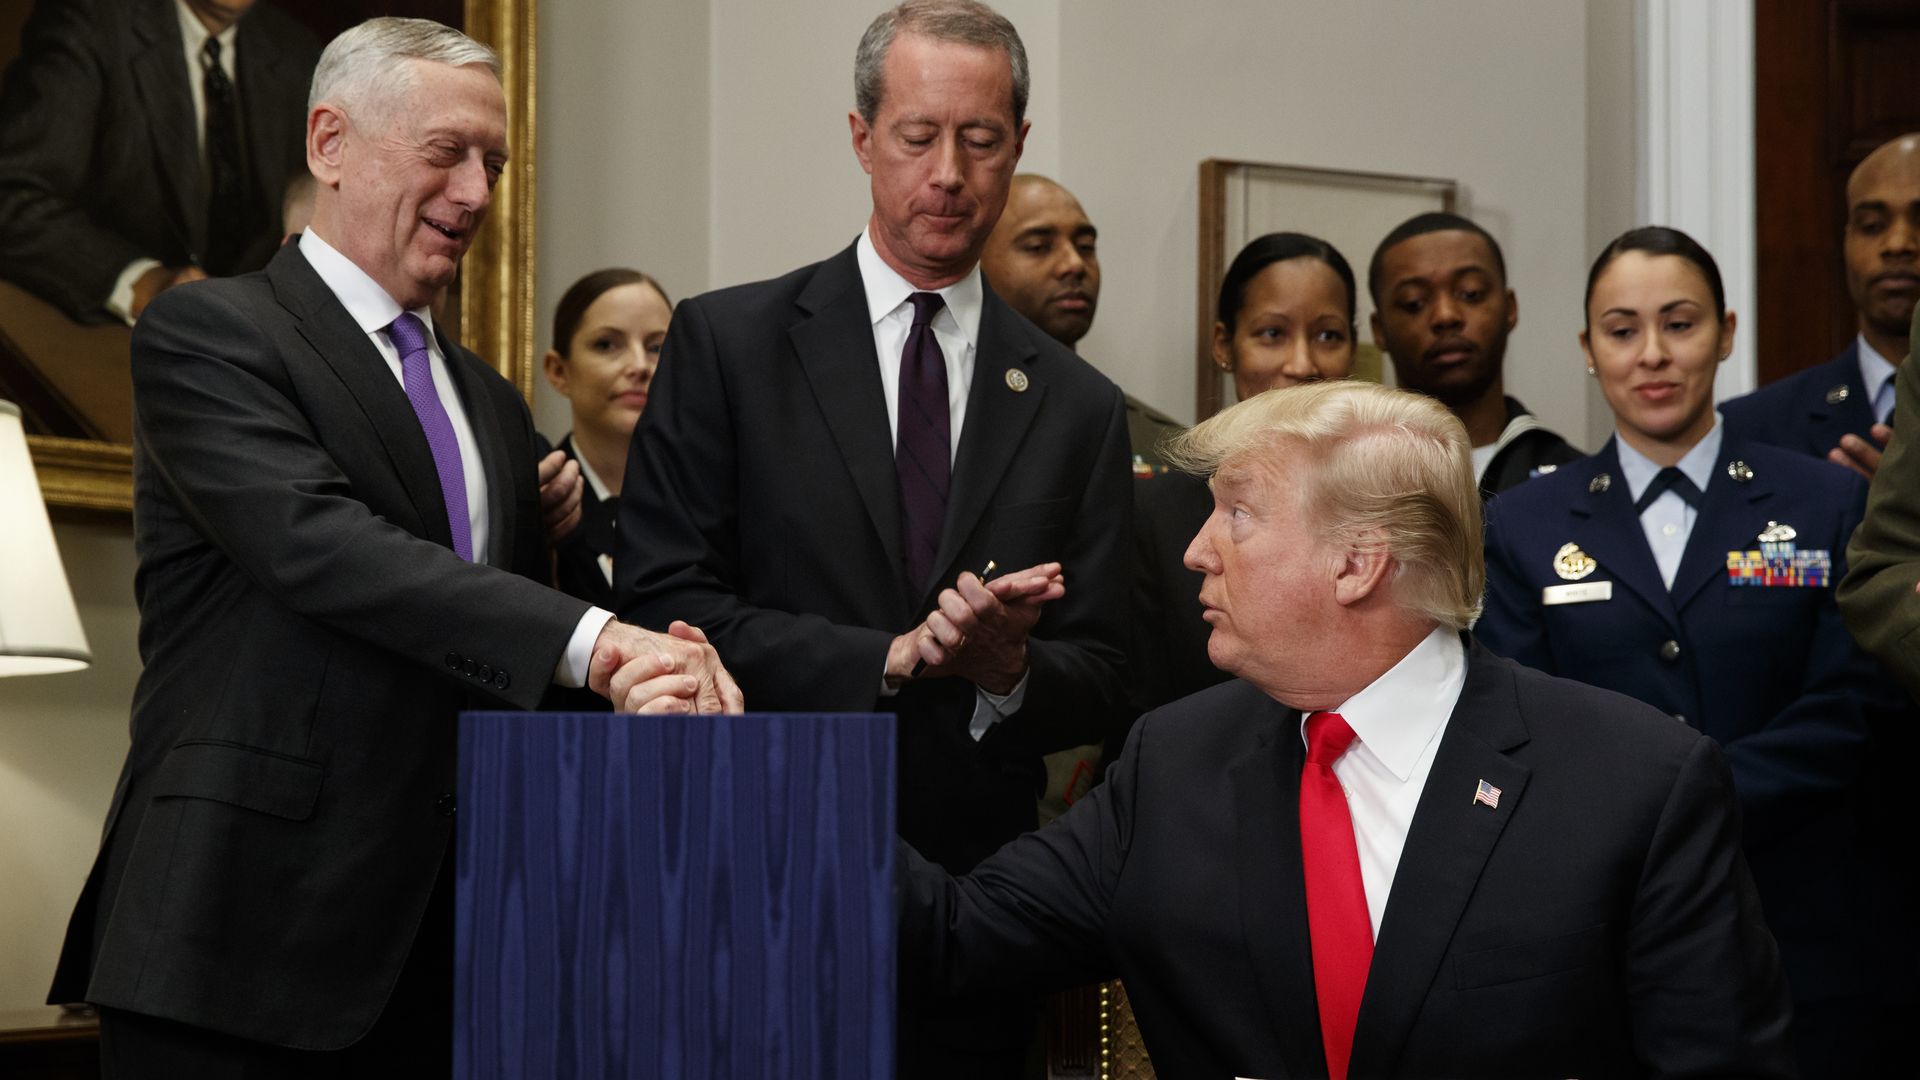 President Donald Trump shakes hands with Secretary of Defense Jim Mattis after signing the National Defense Authorization Act for Fiscal Year 2018.